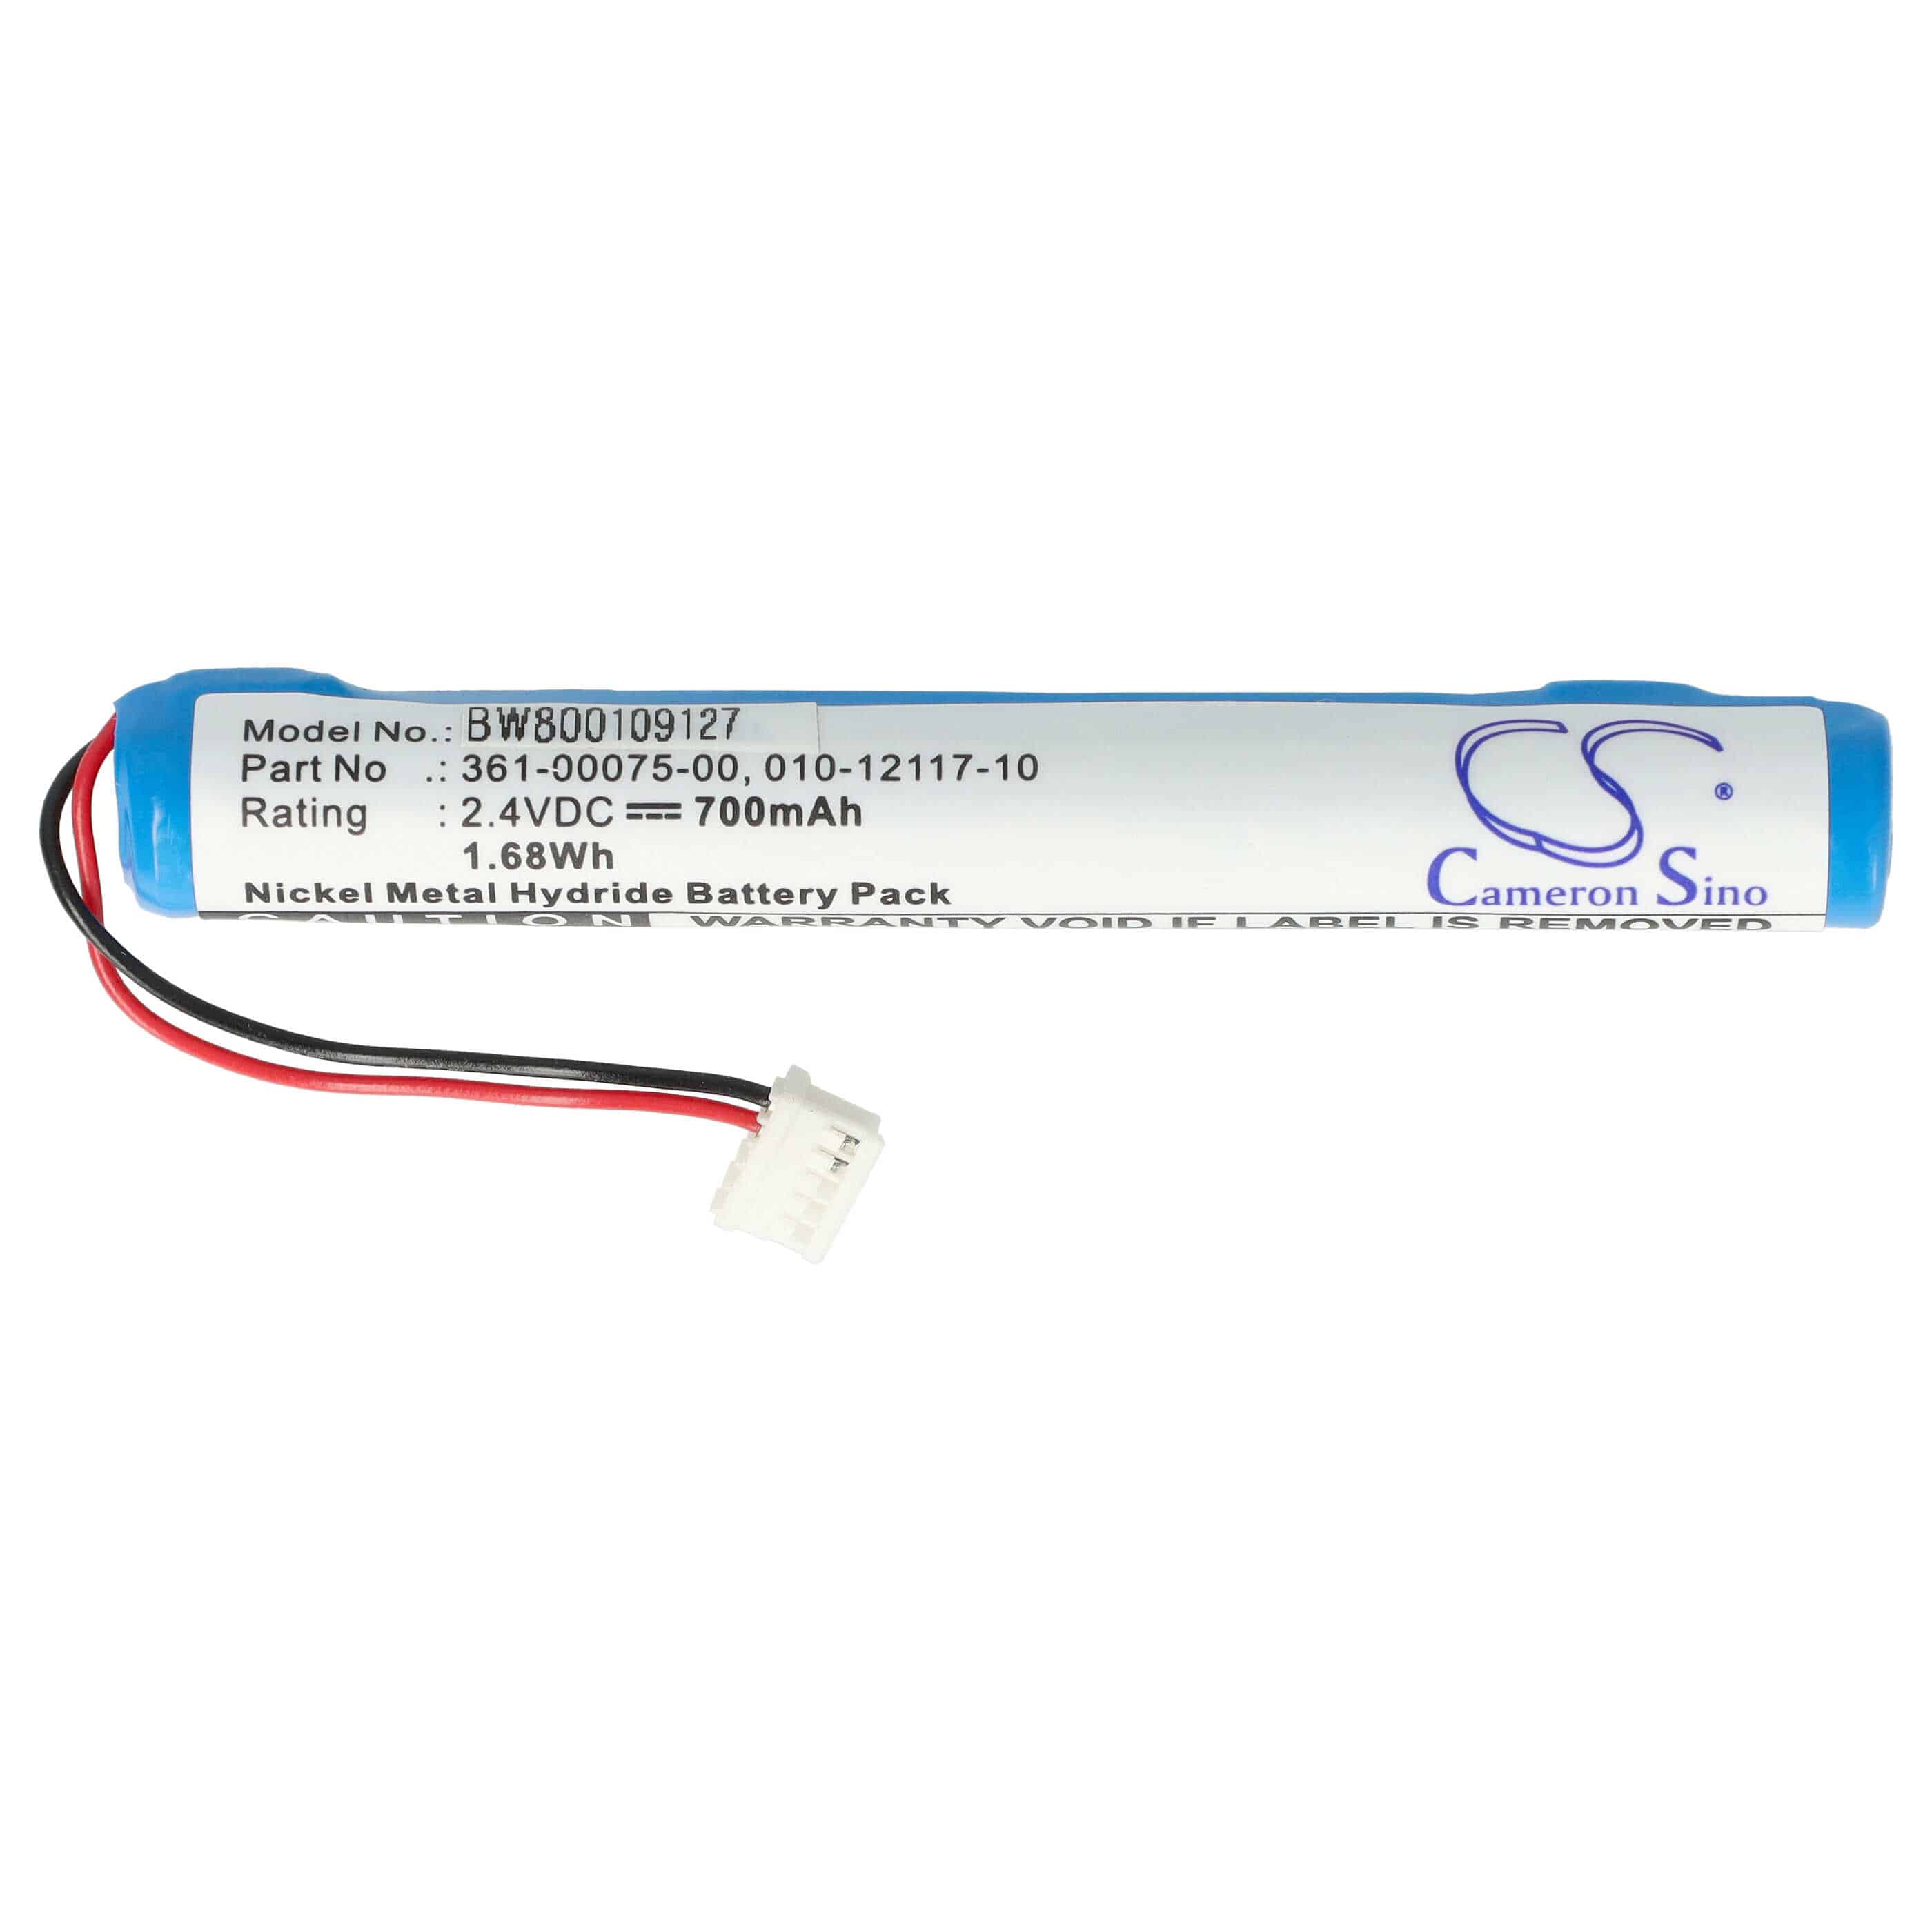 GPS Battery Replacement for 010-12117-10, 361-00075-00 - 700mAh, 2.4V